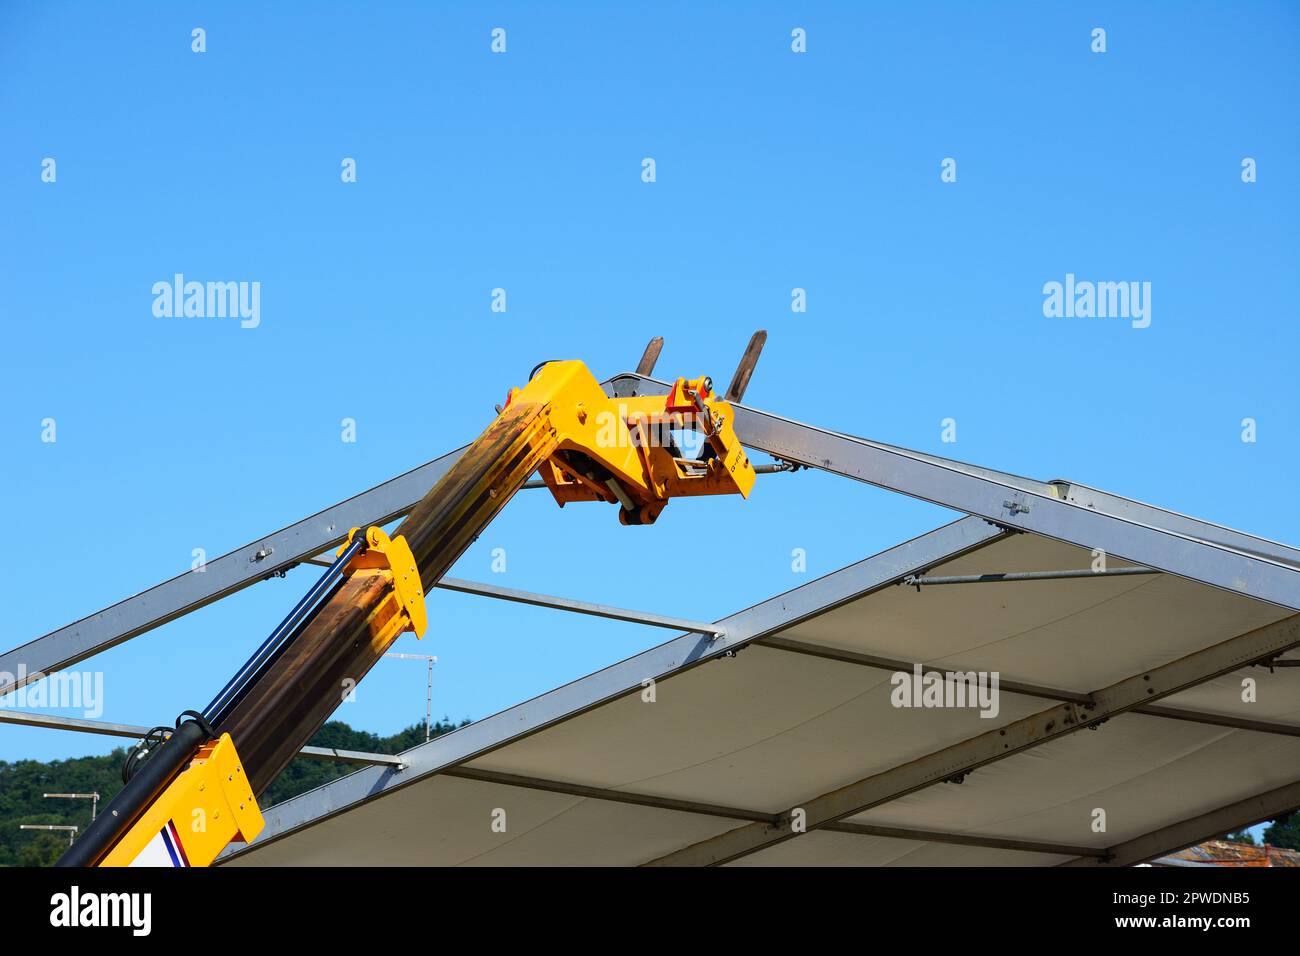 SIDMOUTH, UK - AUGUST 08, 2022 - Removing metal roofing using a hydraulically powered telescopic tractor, Sidmouth, Devon, UK, Europe, August 08, 2022 Stock Photo